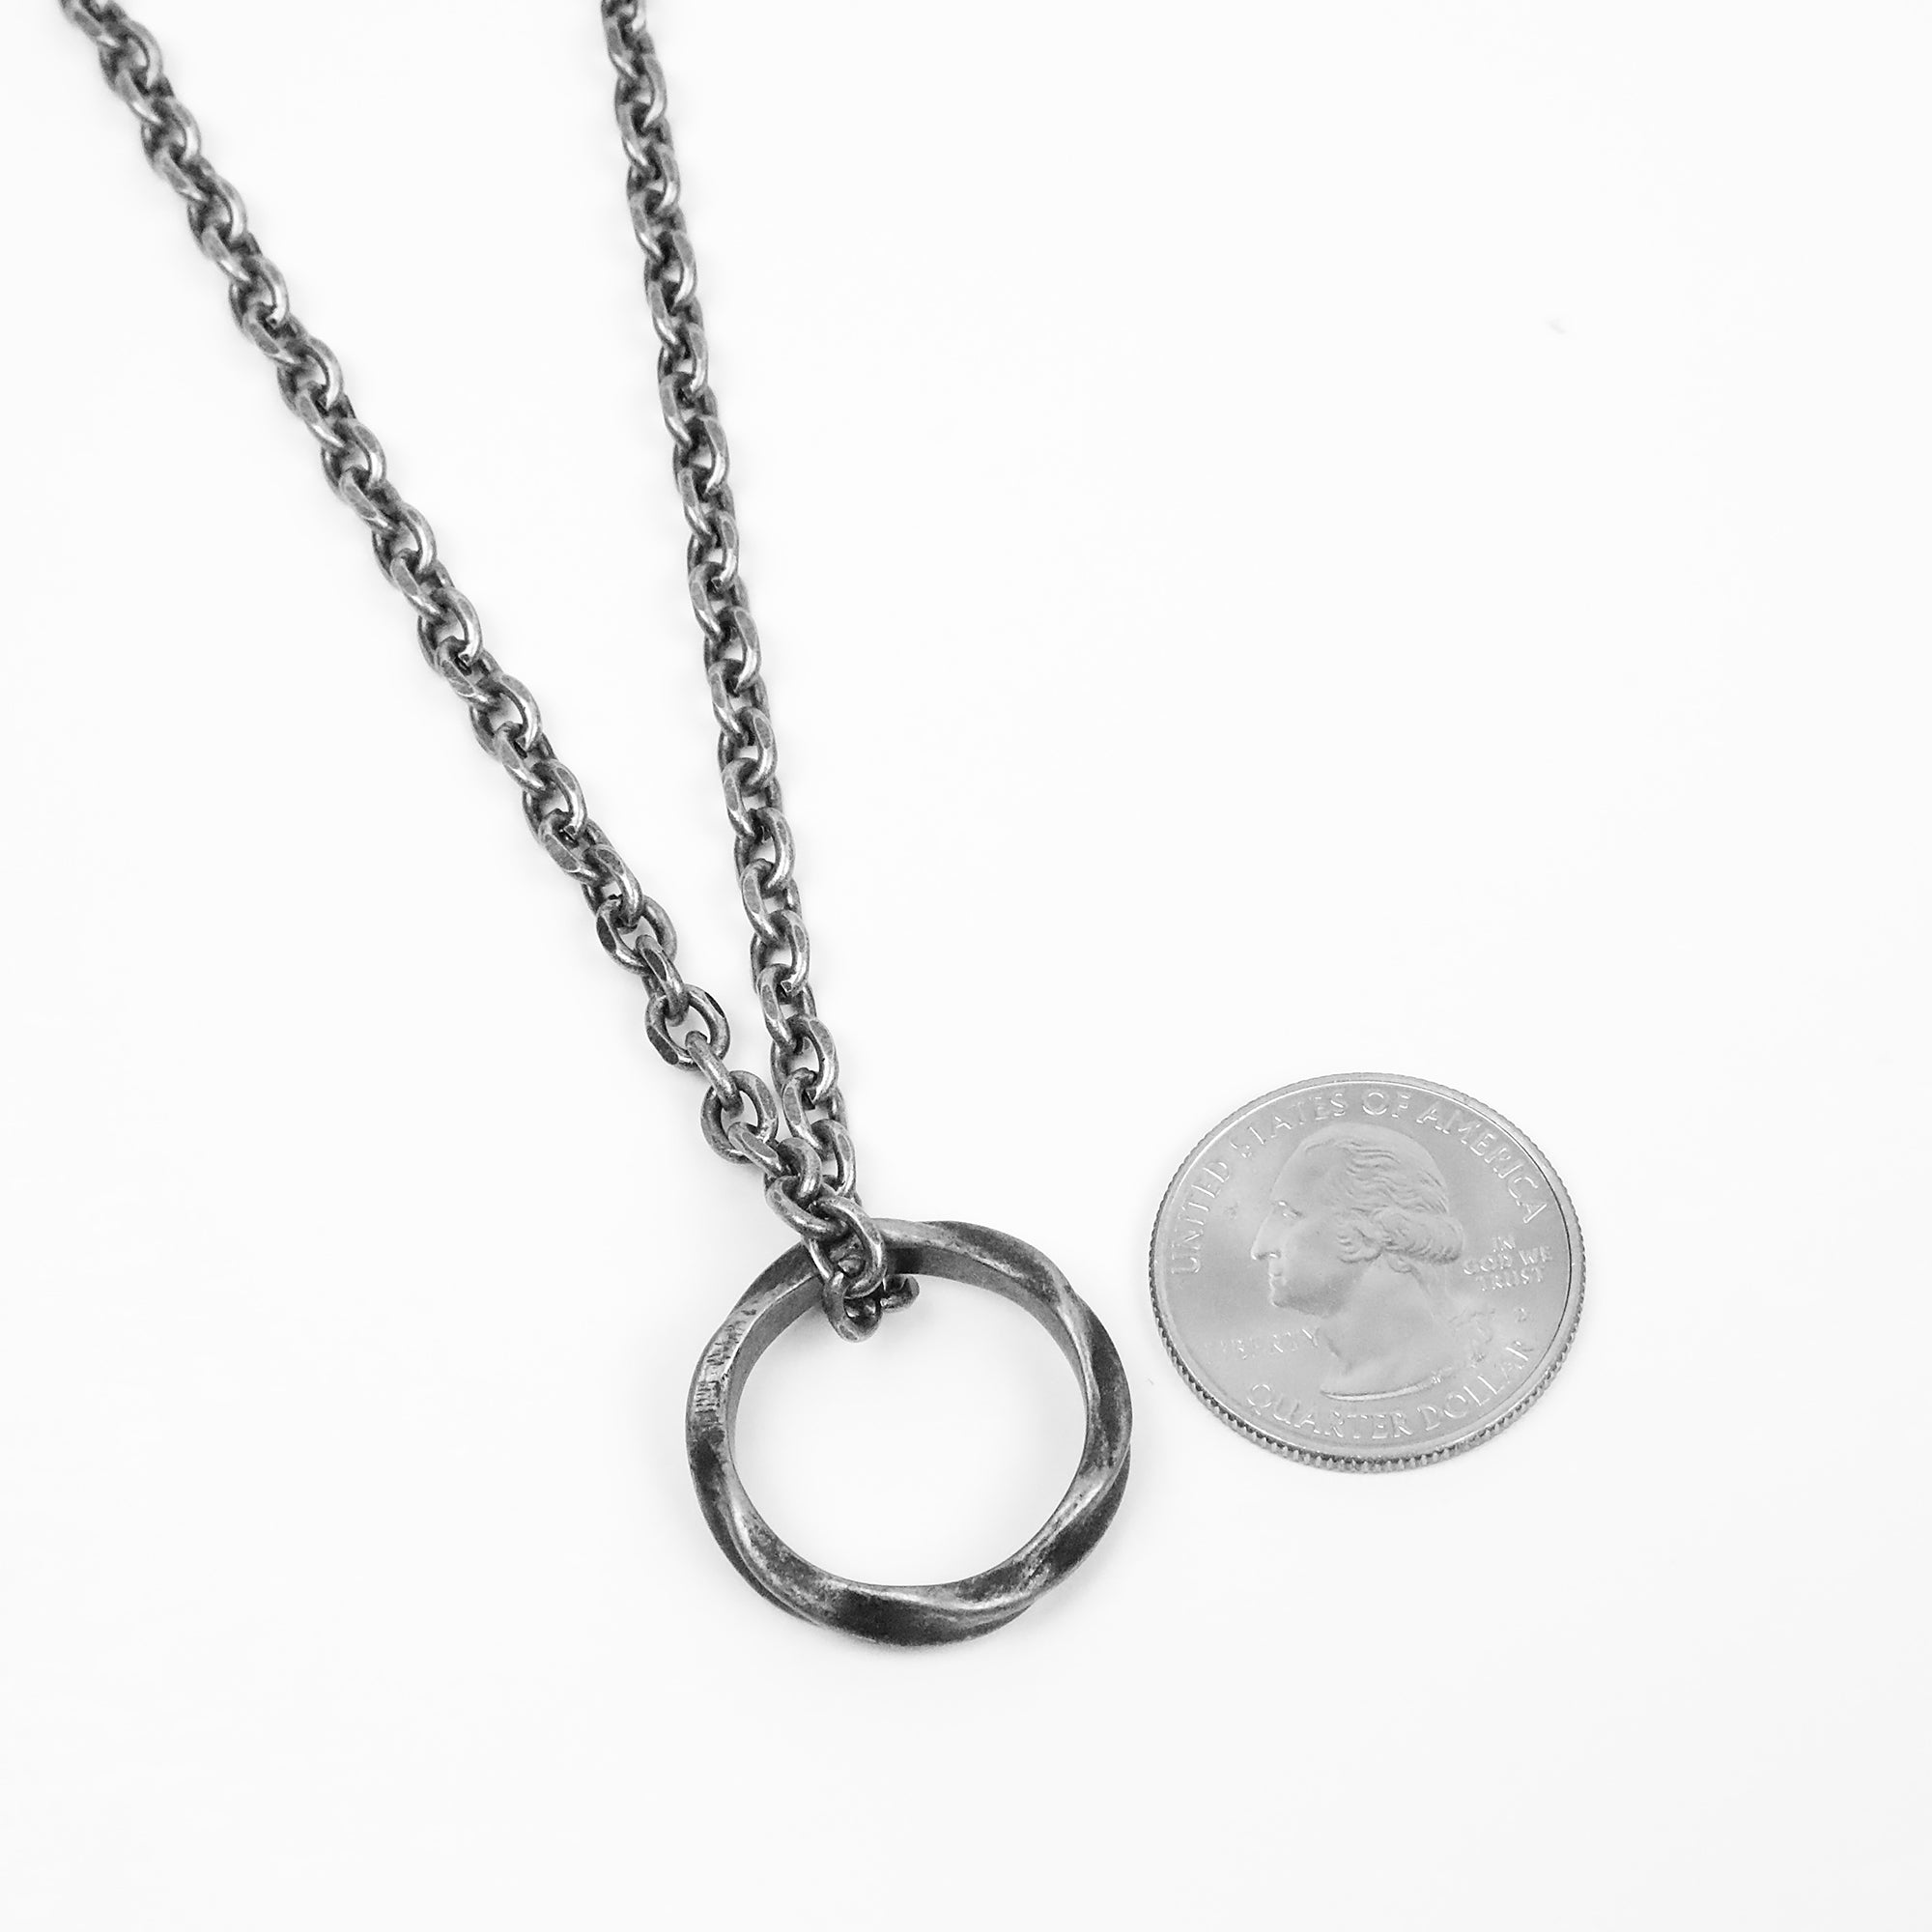 Twist Ring Necklace - Antique Silver